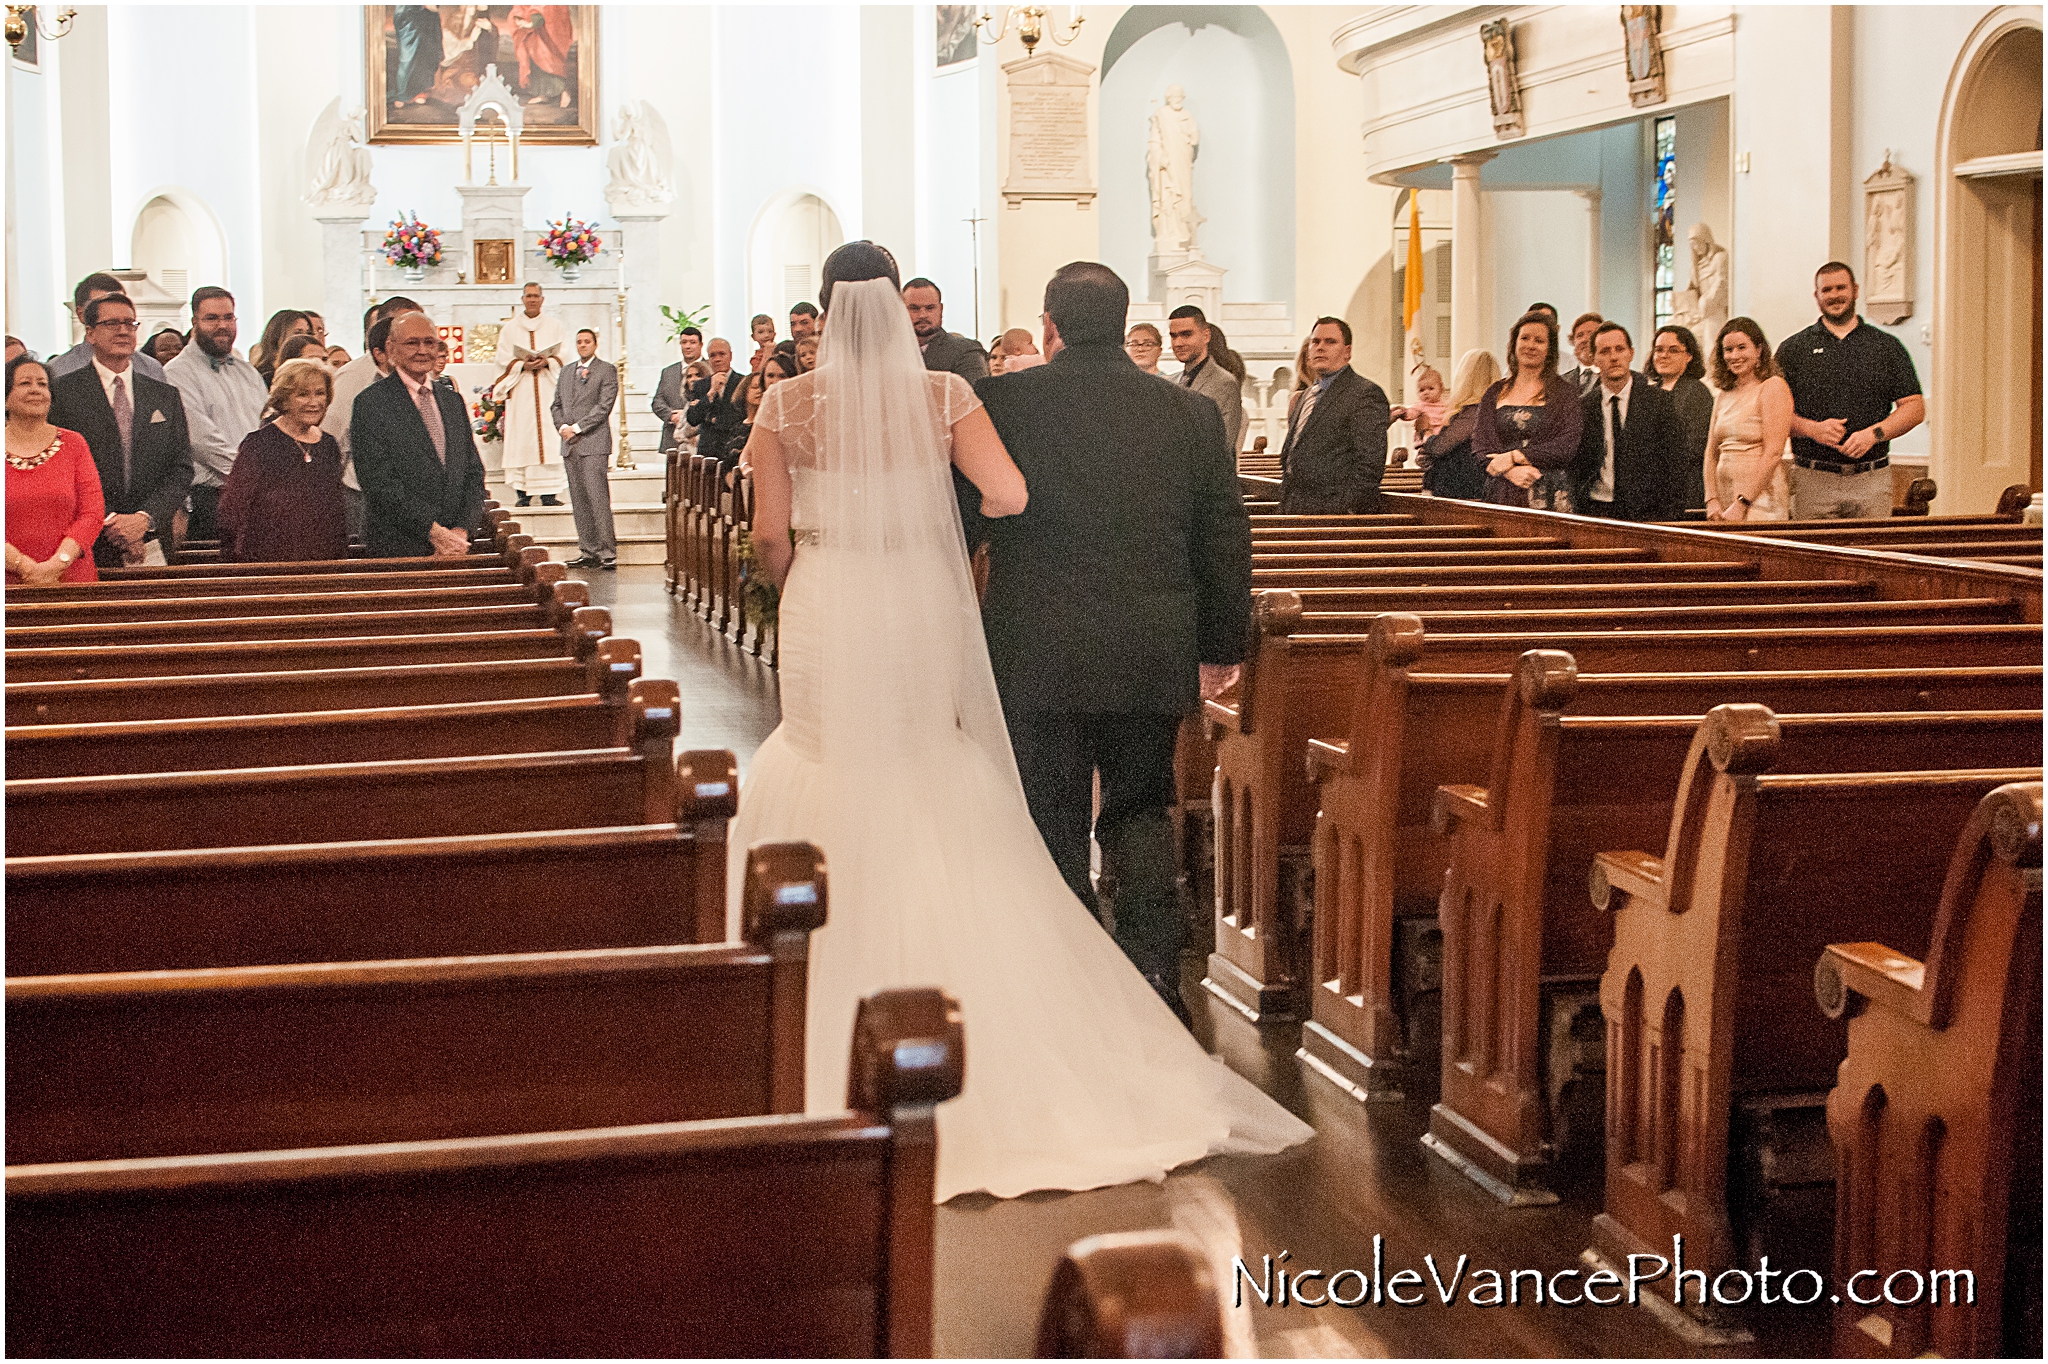 The groom sees his bride enter at St Peter's Catholic Church, in Richmond VA.